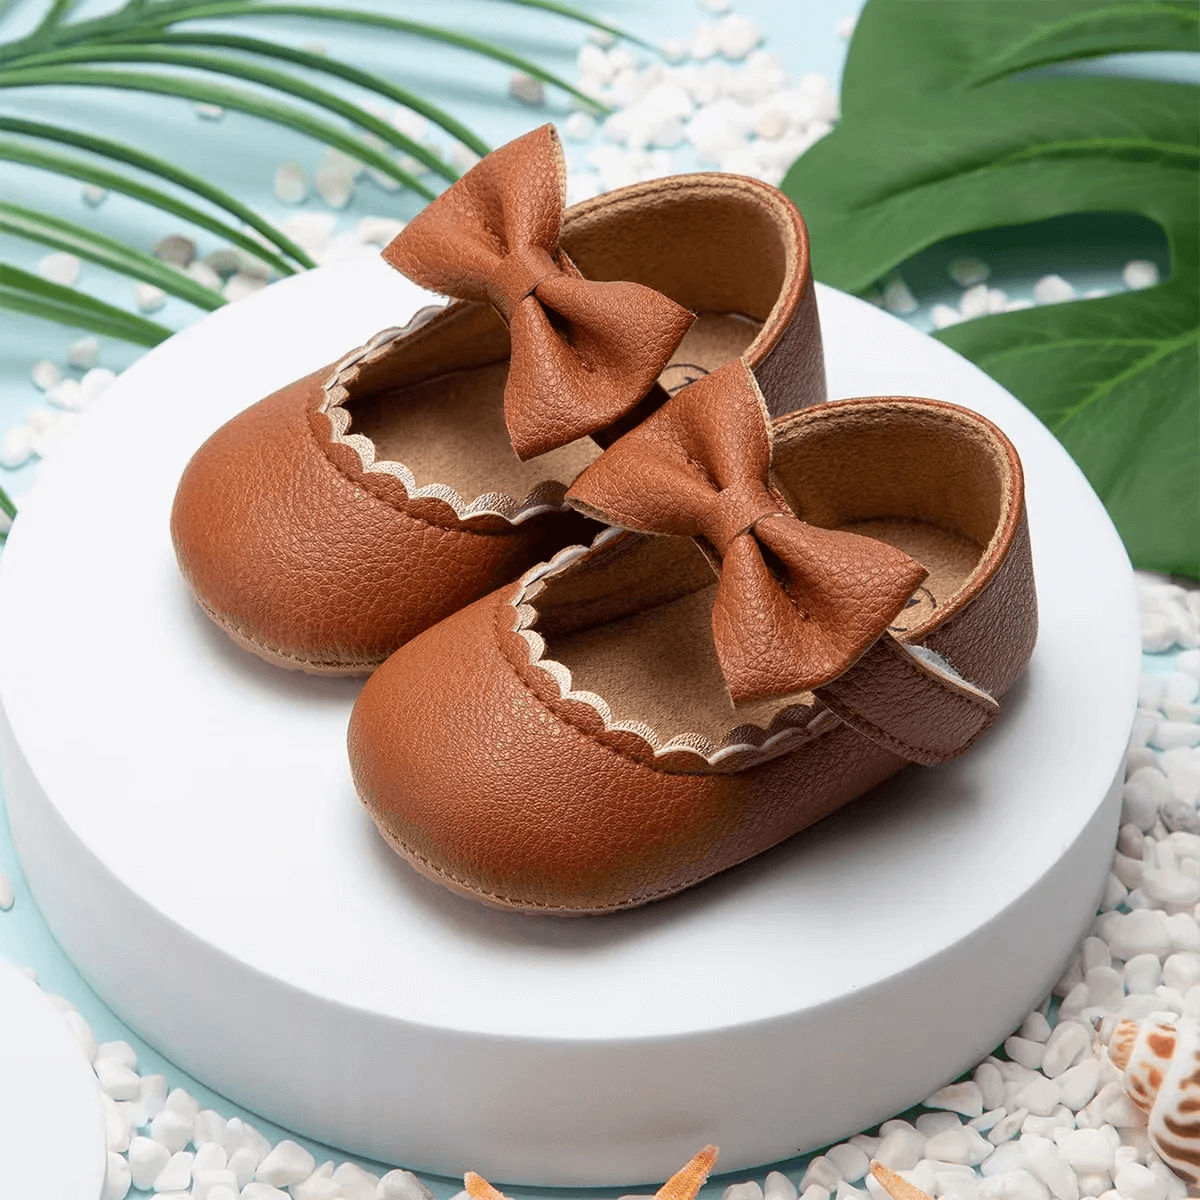 Amayra Soft Sole Shoes - Tan